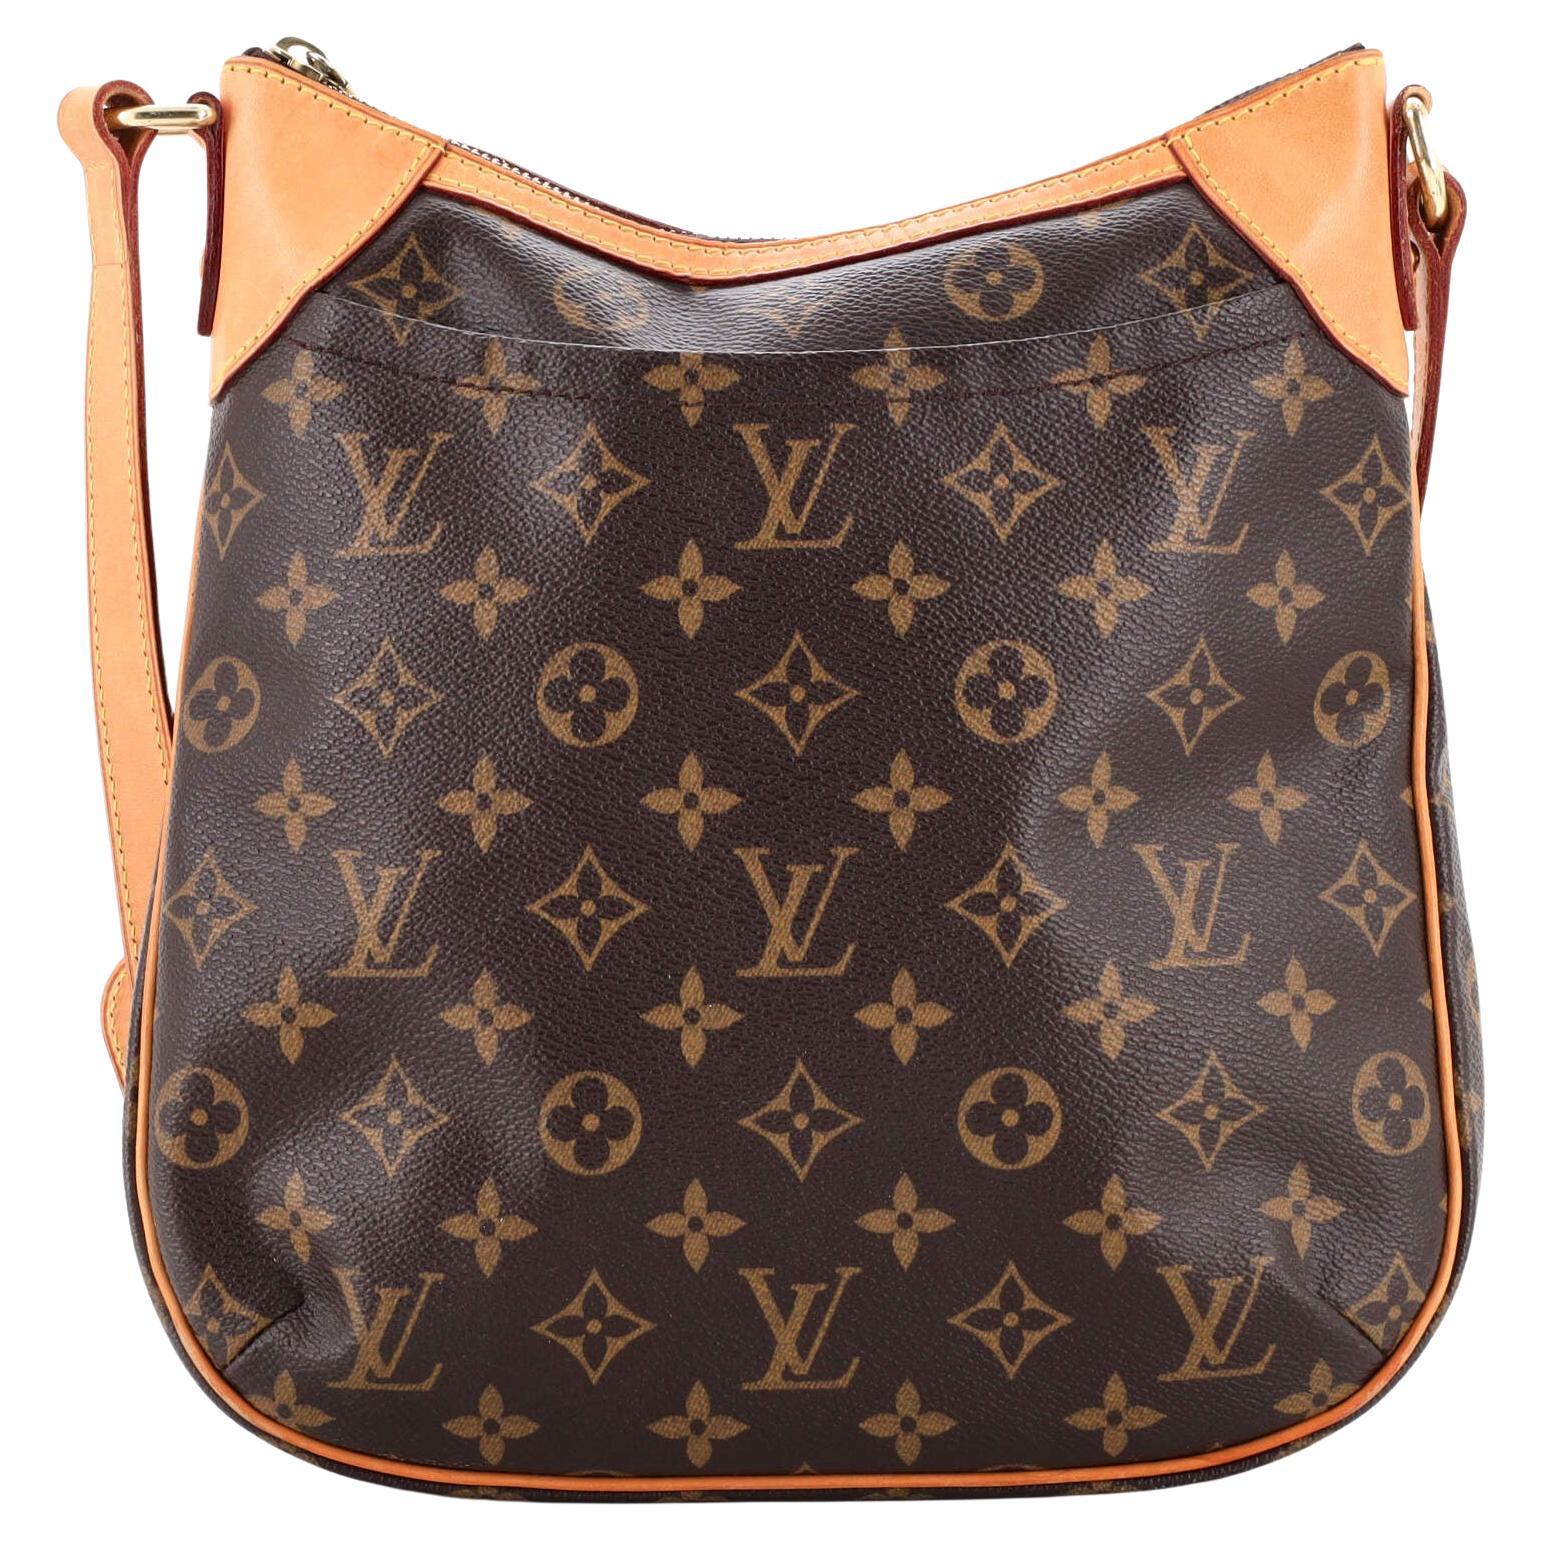 Louis Vuitton Small Shoulder Bags - 135 For Sale on 1stDibs  small louis  vuitton bag, lv shoulder bag small, louis vuitton bag small